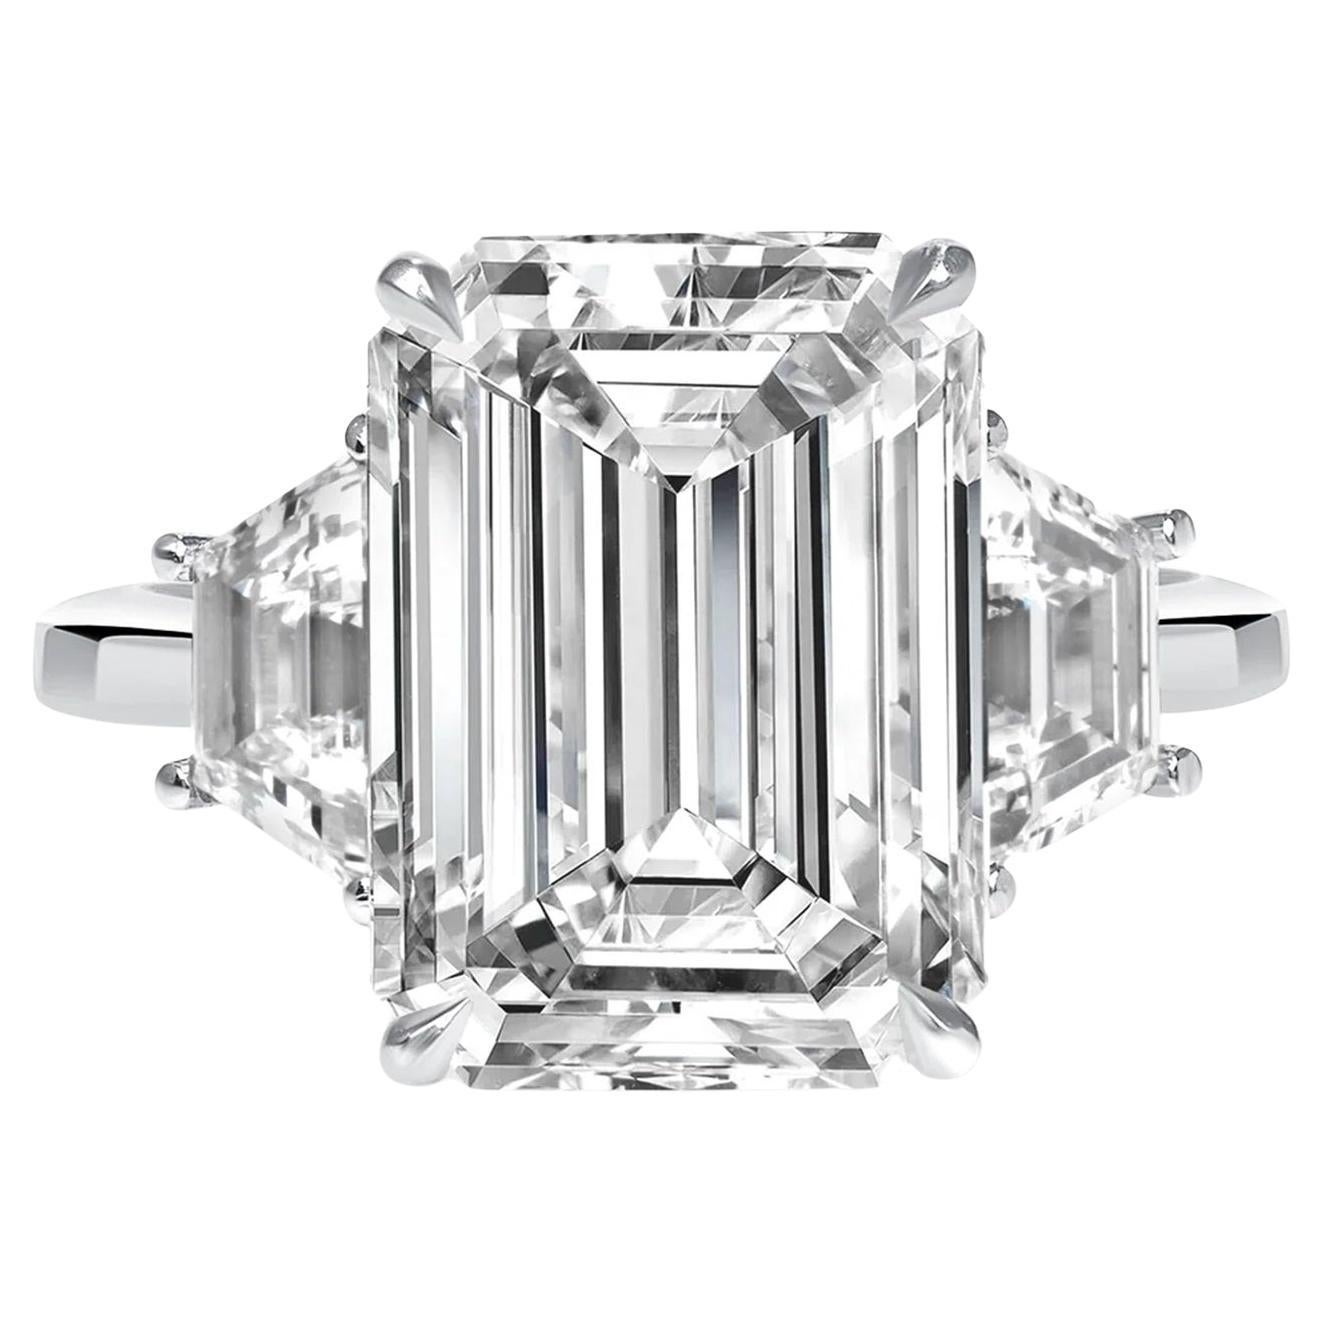 GIA Certified 3 Carat Emerald Cut Diamond Platinum Ring Flawless Clarity D color For Sale